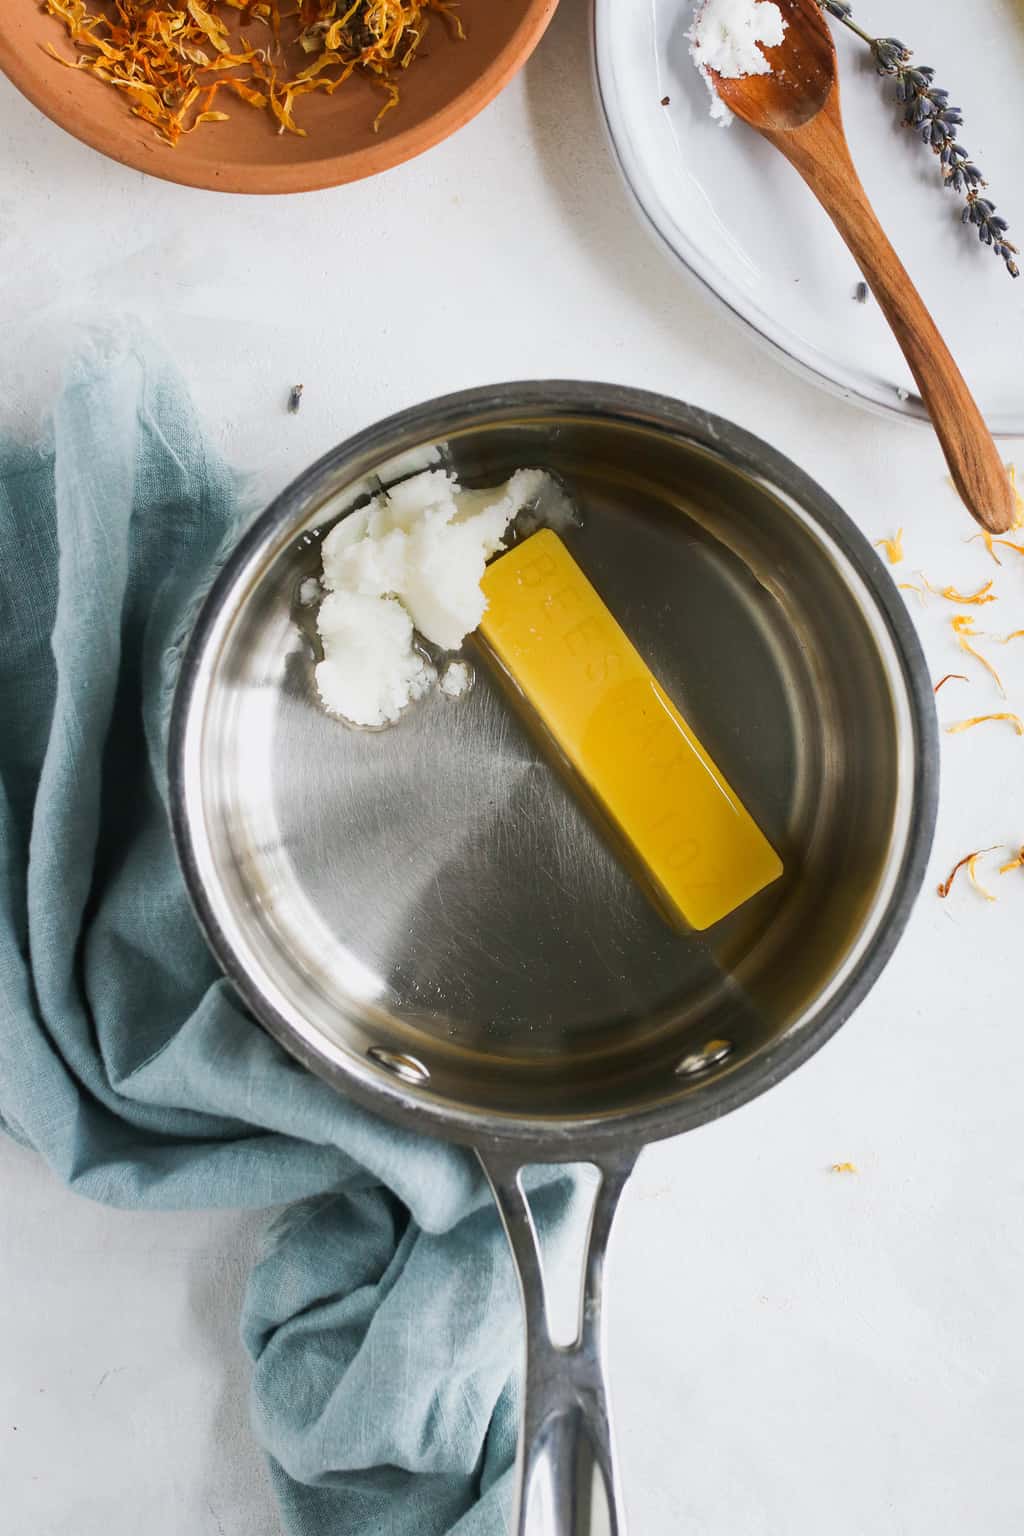 Melting shea butter and beeswax for bug bite balm